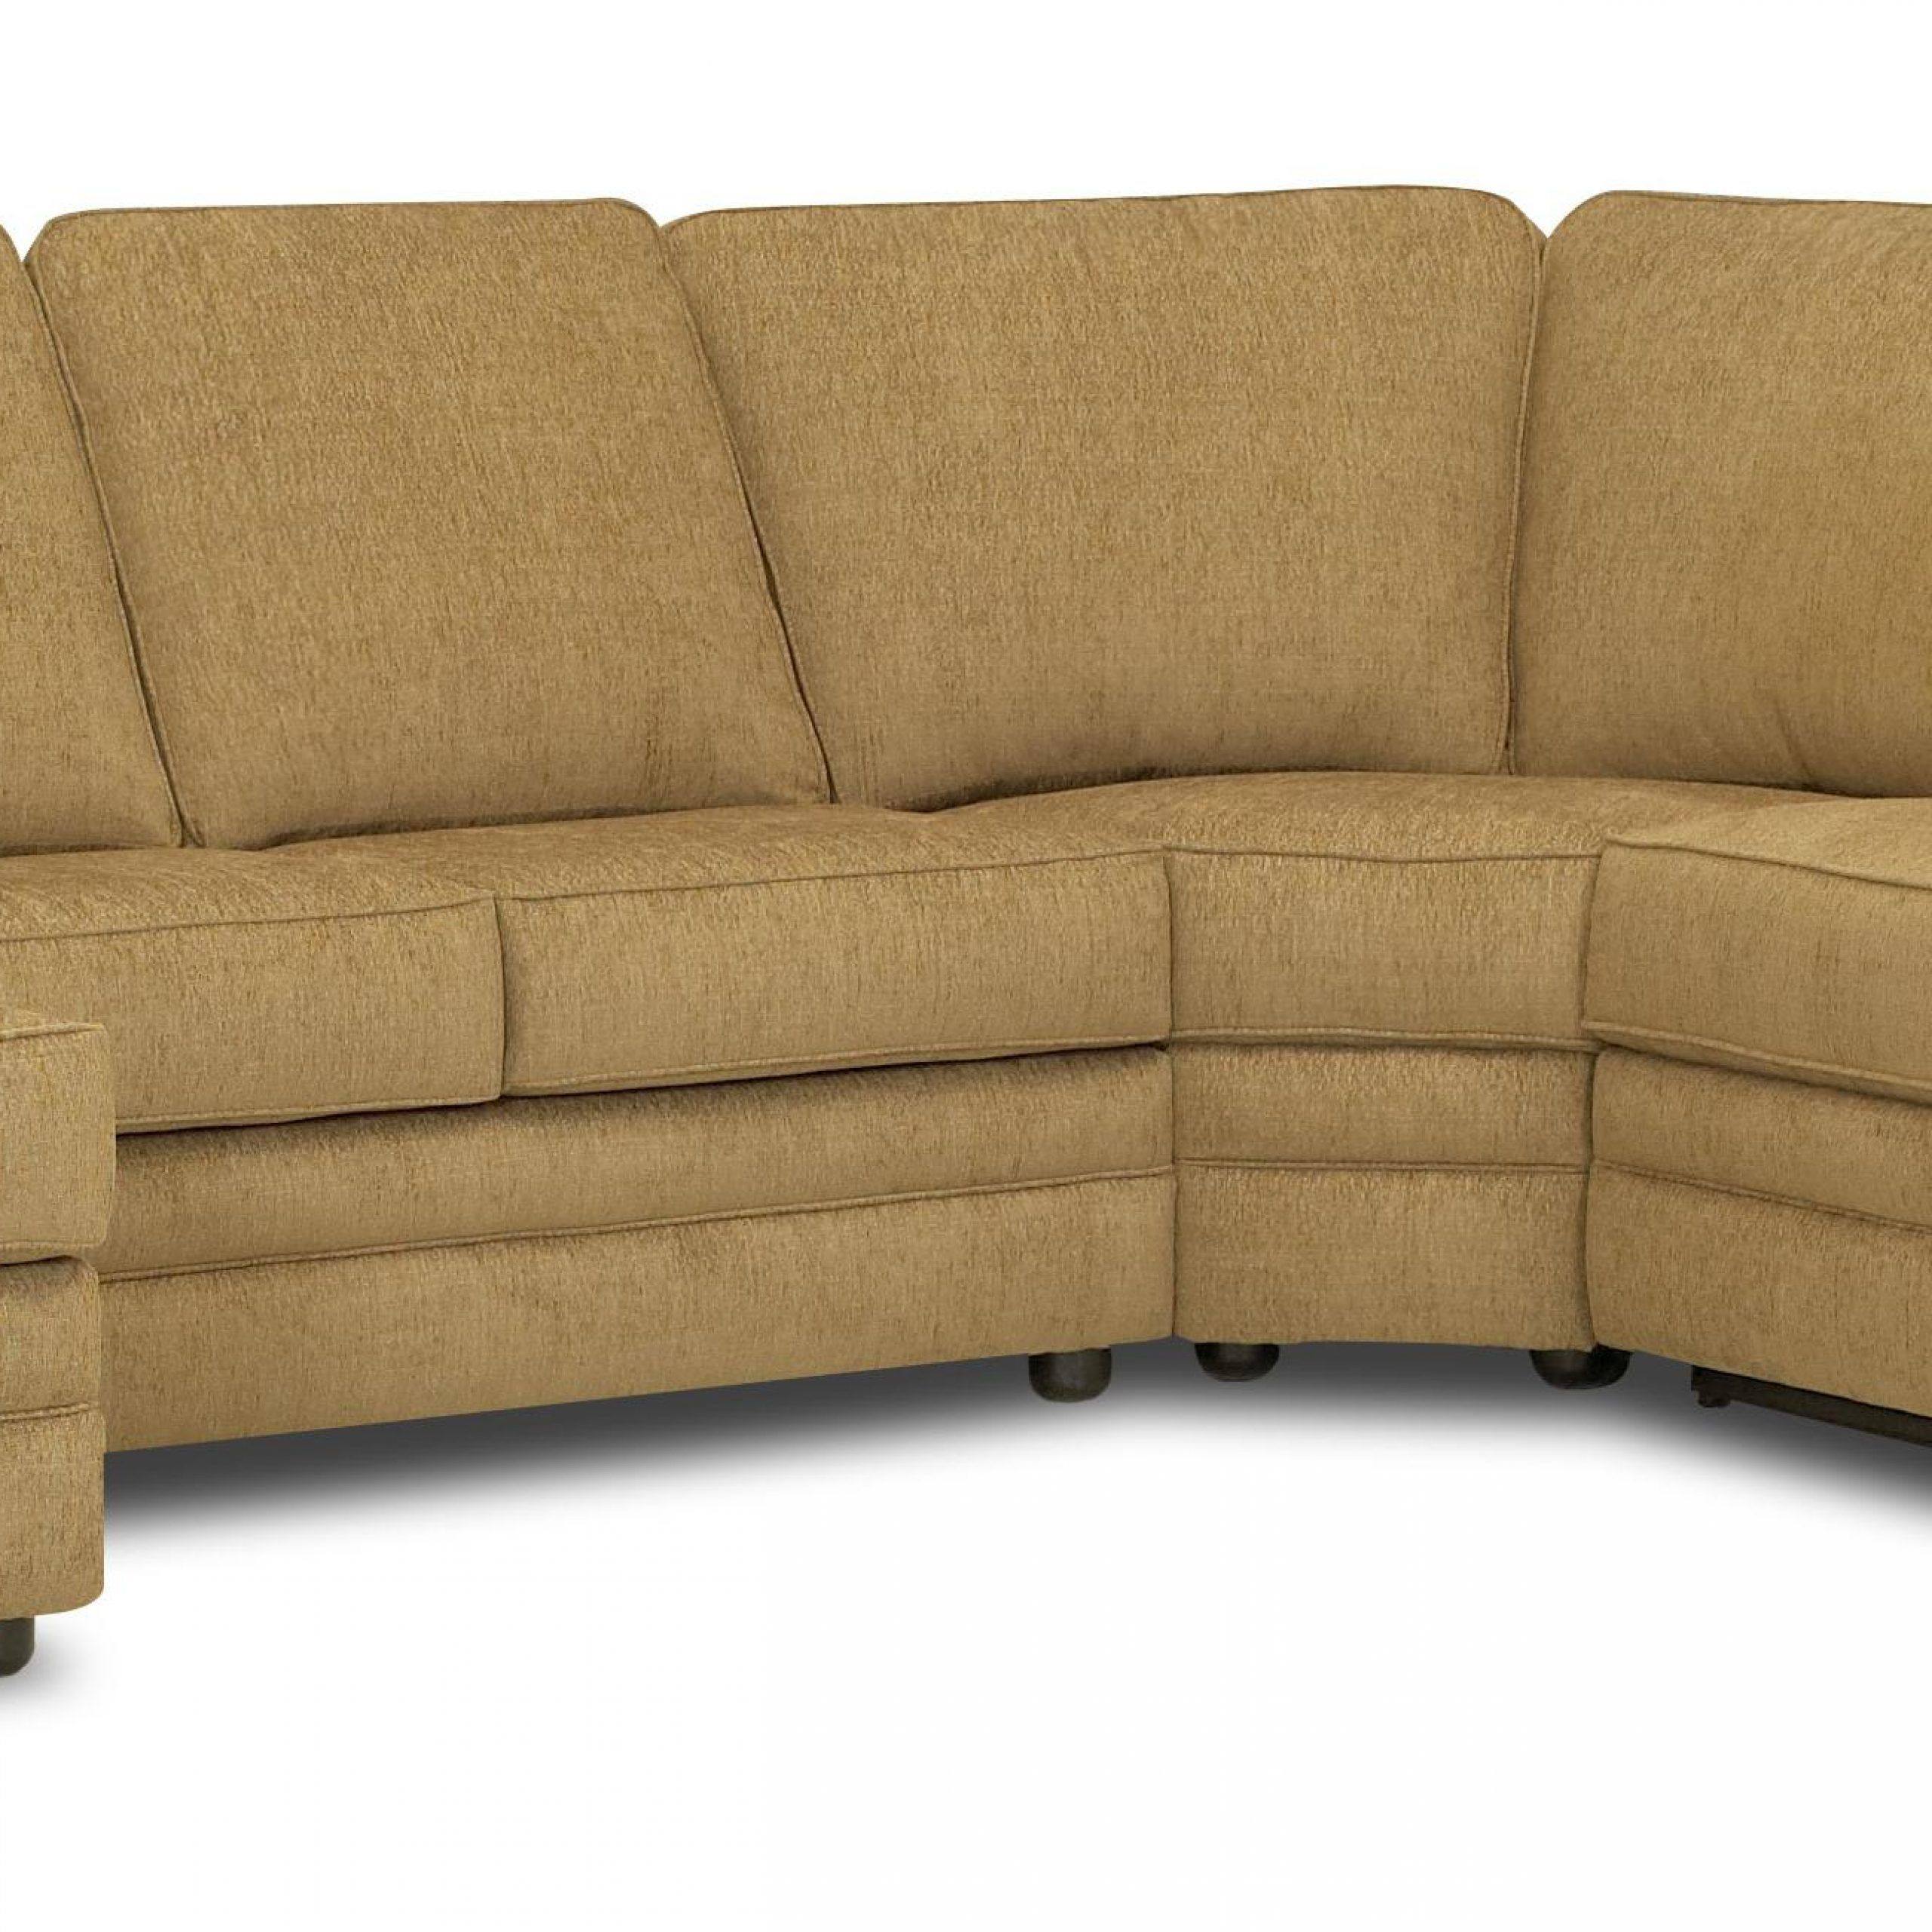 Reclining Sectional With Left Side Chaiseklaussner Intended For Palisades Reclining Sectional Sofas With Left Storage Chaise (View 15 of 15)